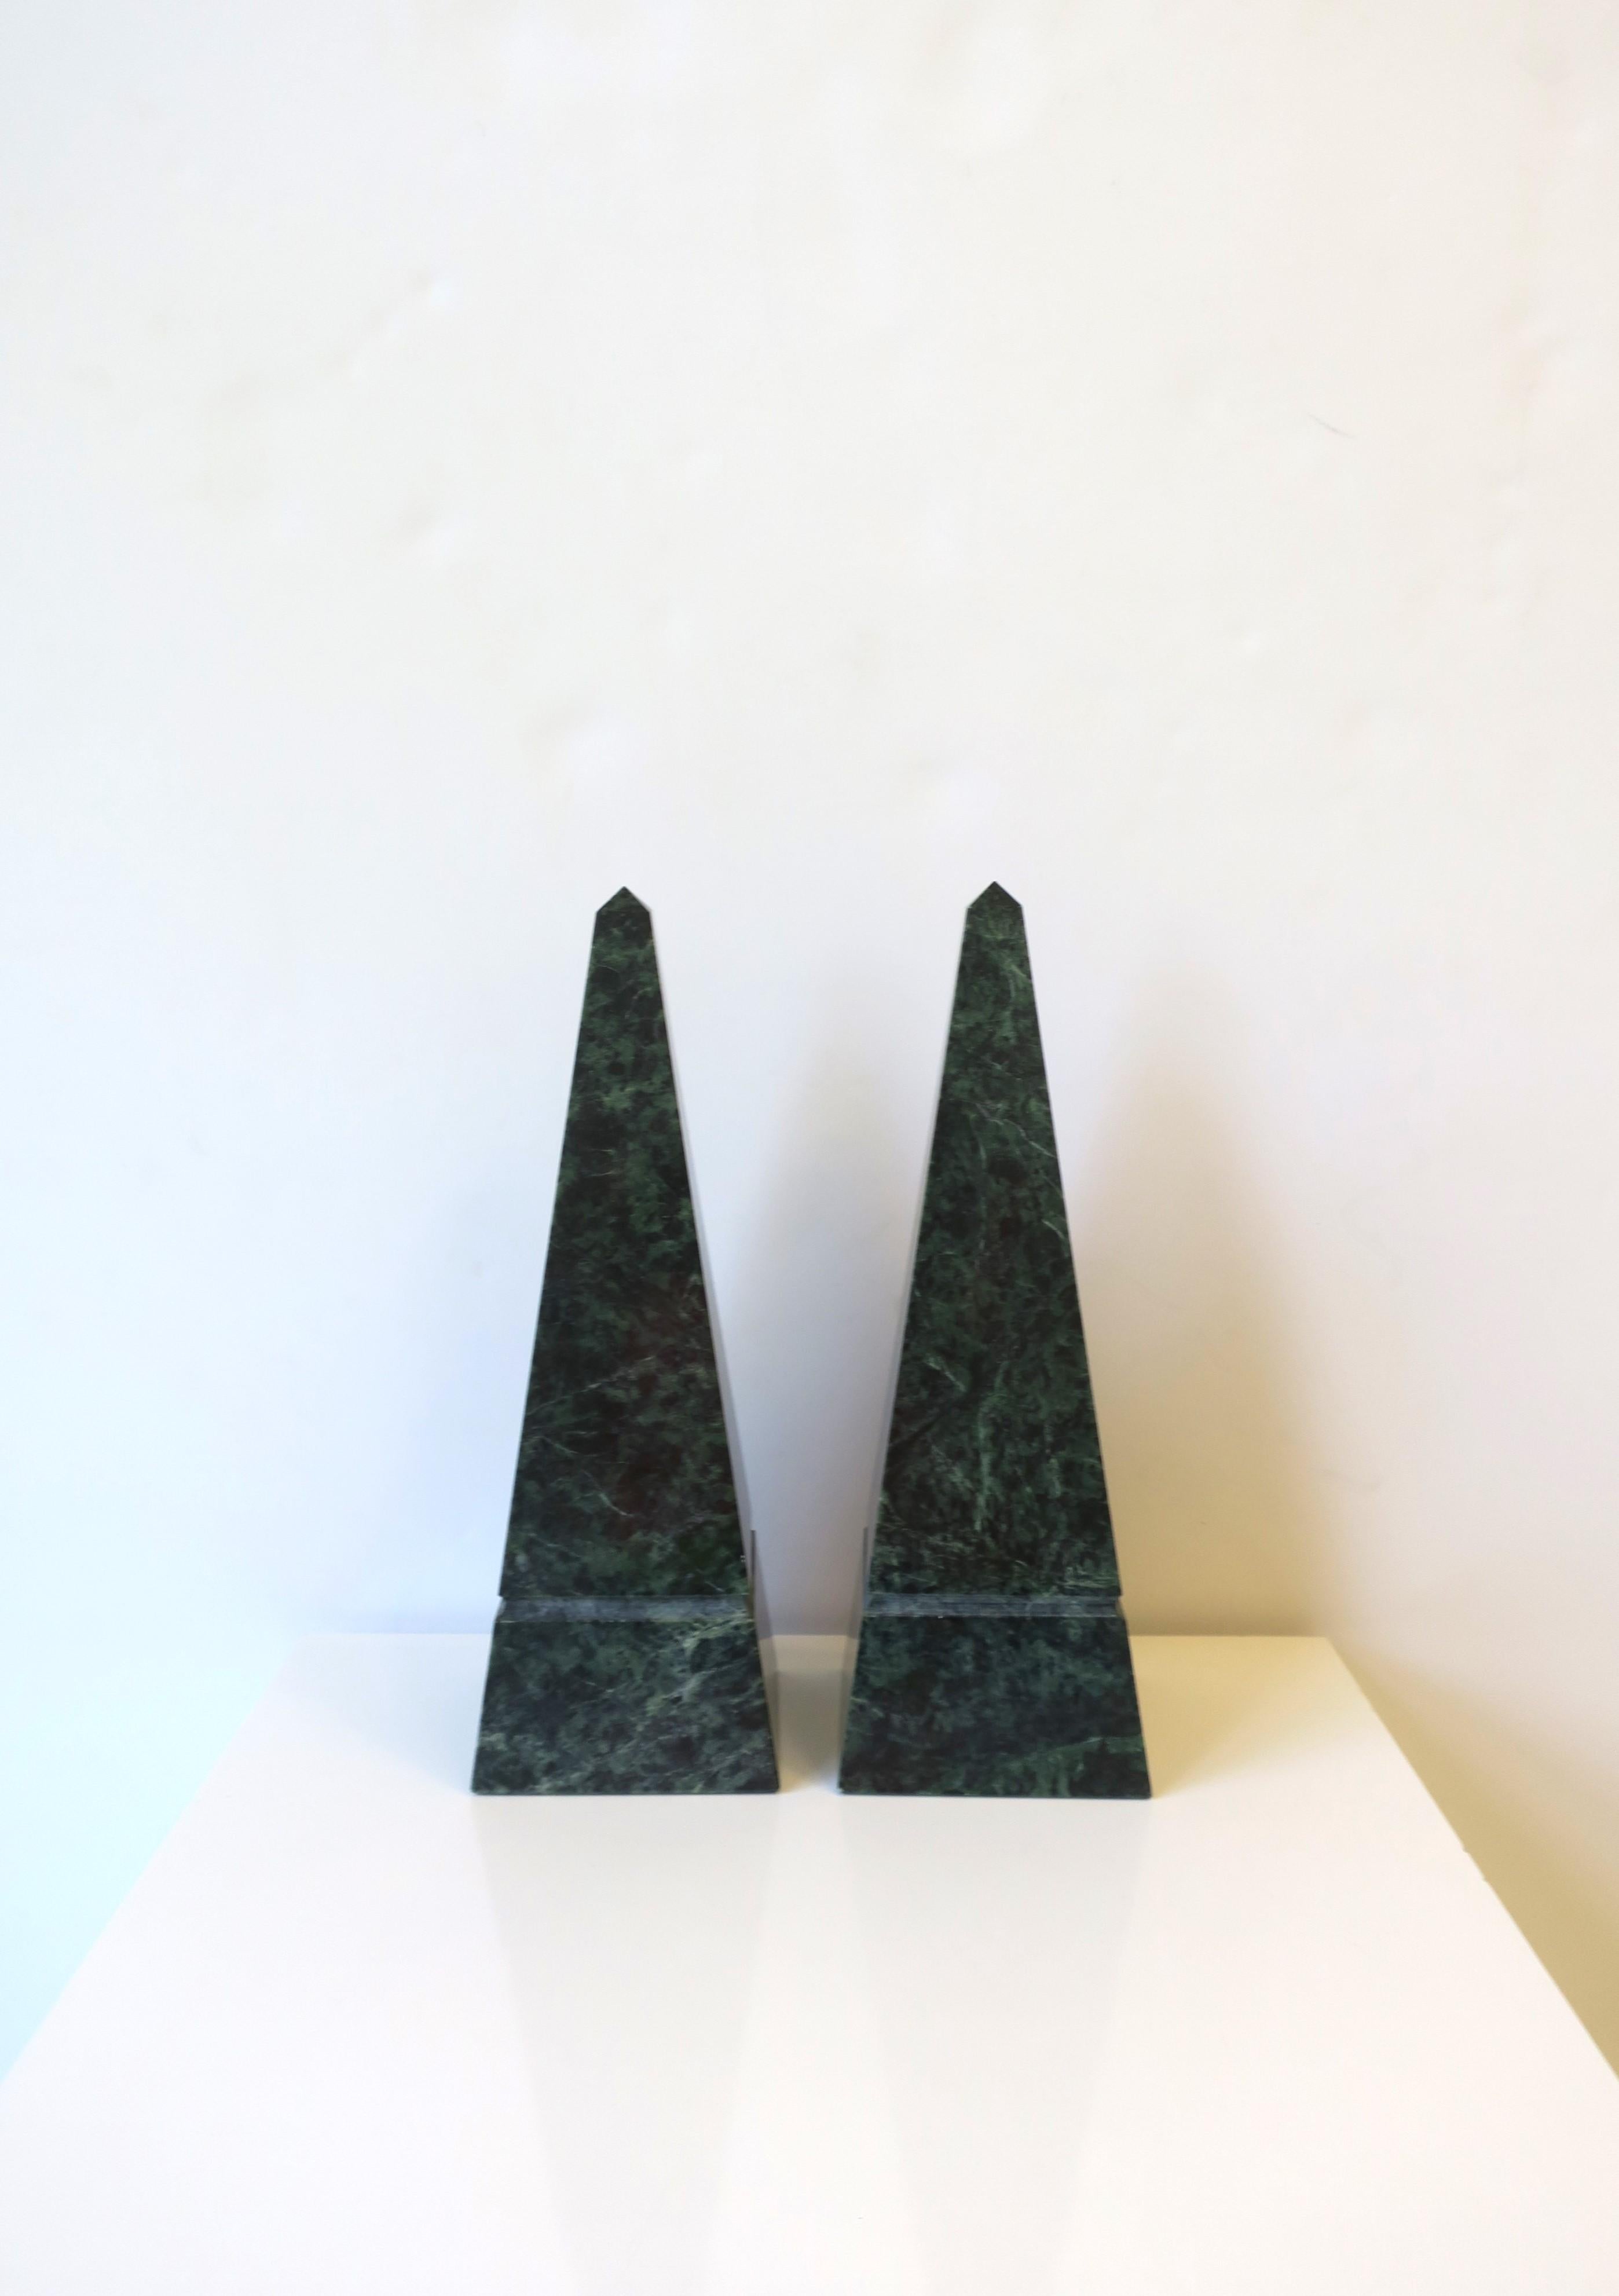 A substantial pair of dark green marble Obelisk sculptures in the modern style, circa late-20th century. Pair/set are dark green marble with black veining, some minor traces of white too. A great set for a mantle, cocktail table, bookshelf, office,